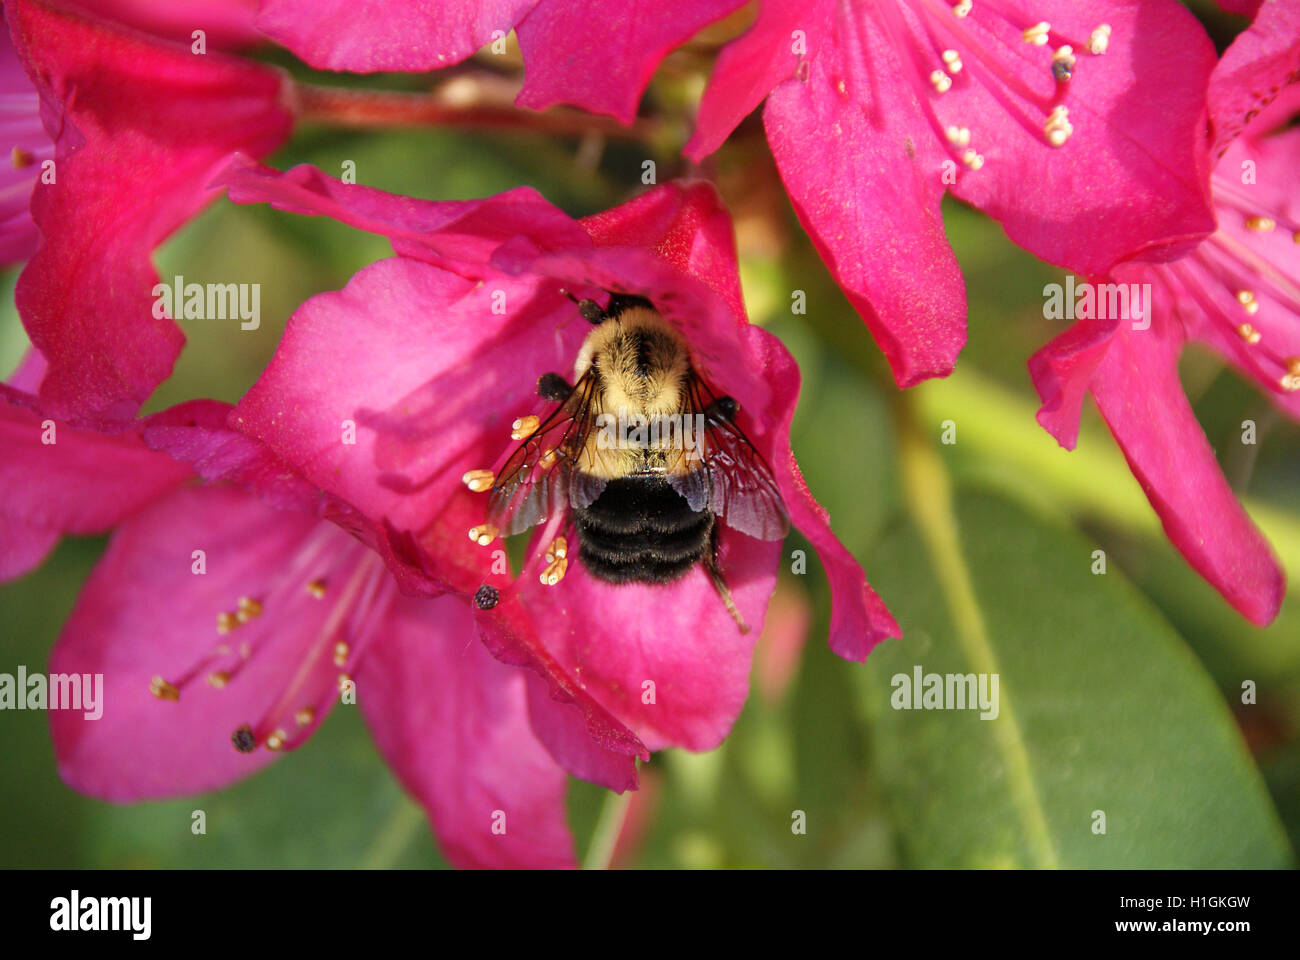 Bumblebee feeding on pink blooming rhododendron bush. Stock Photo